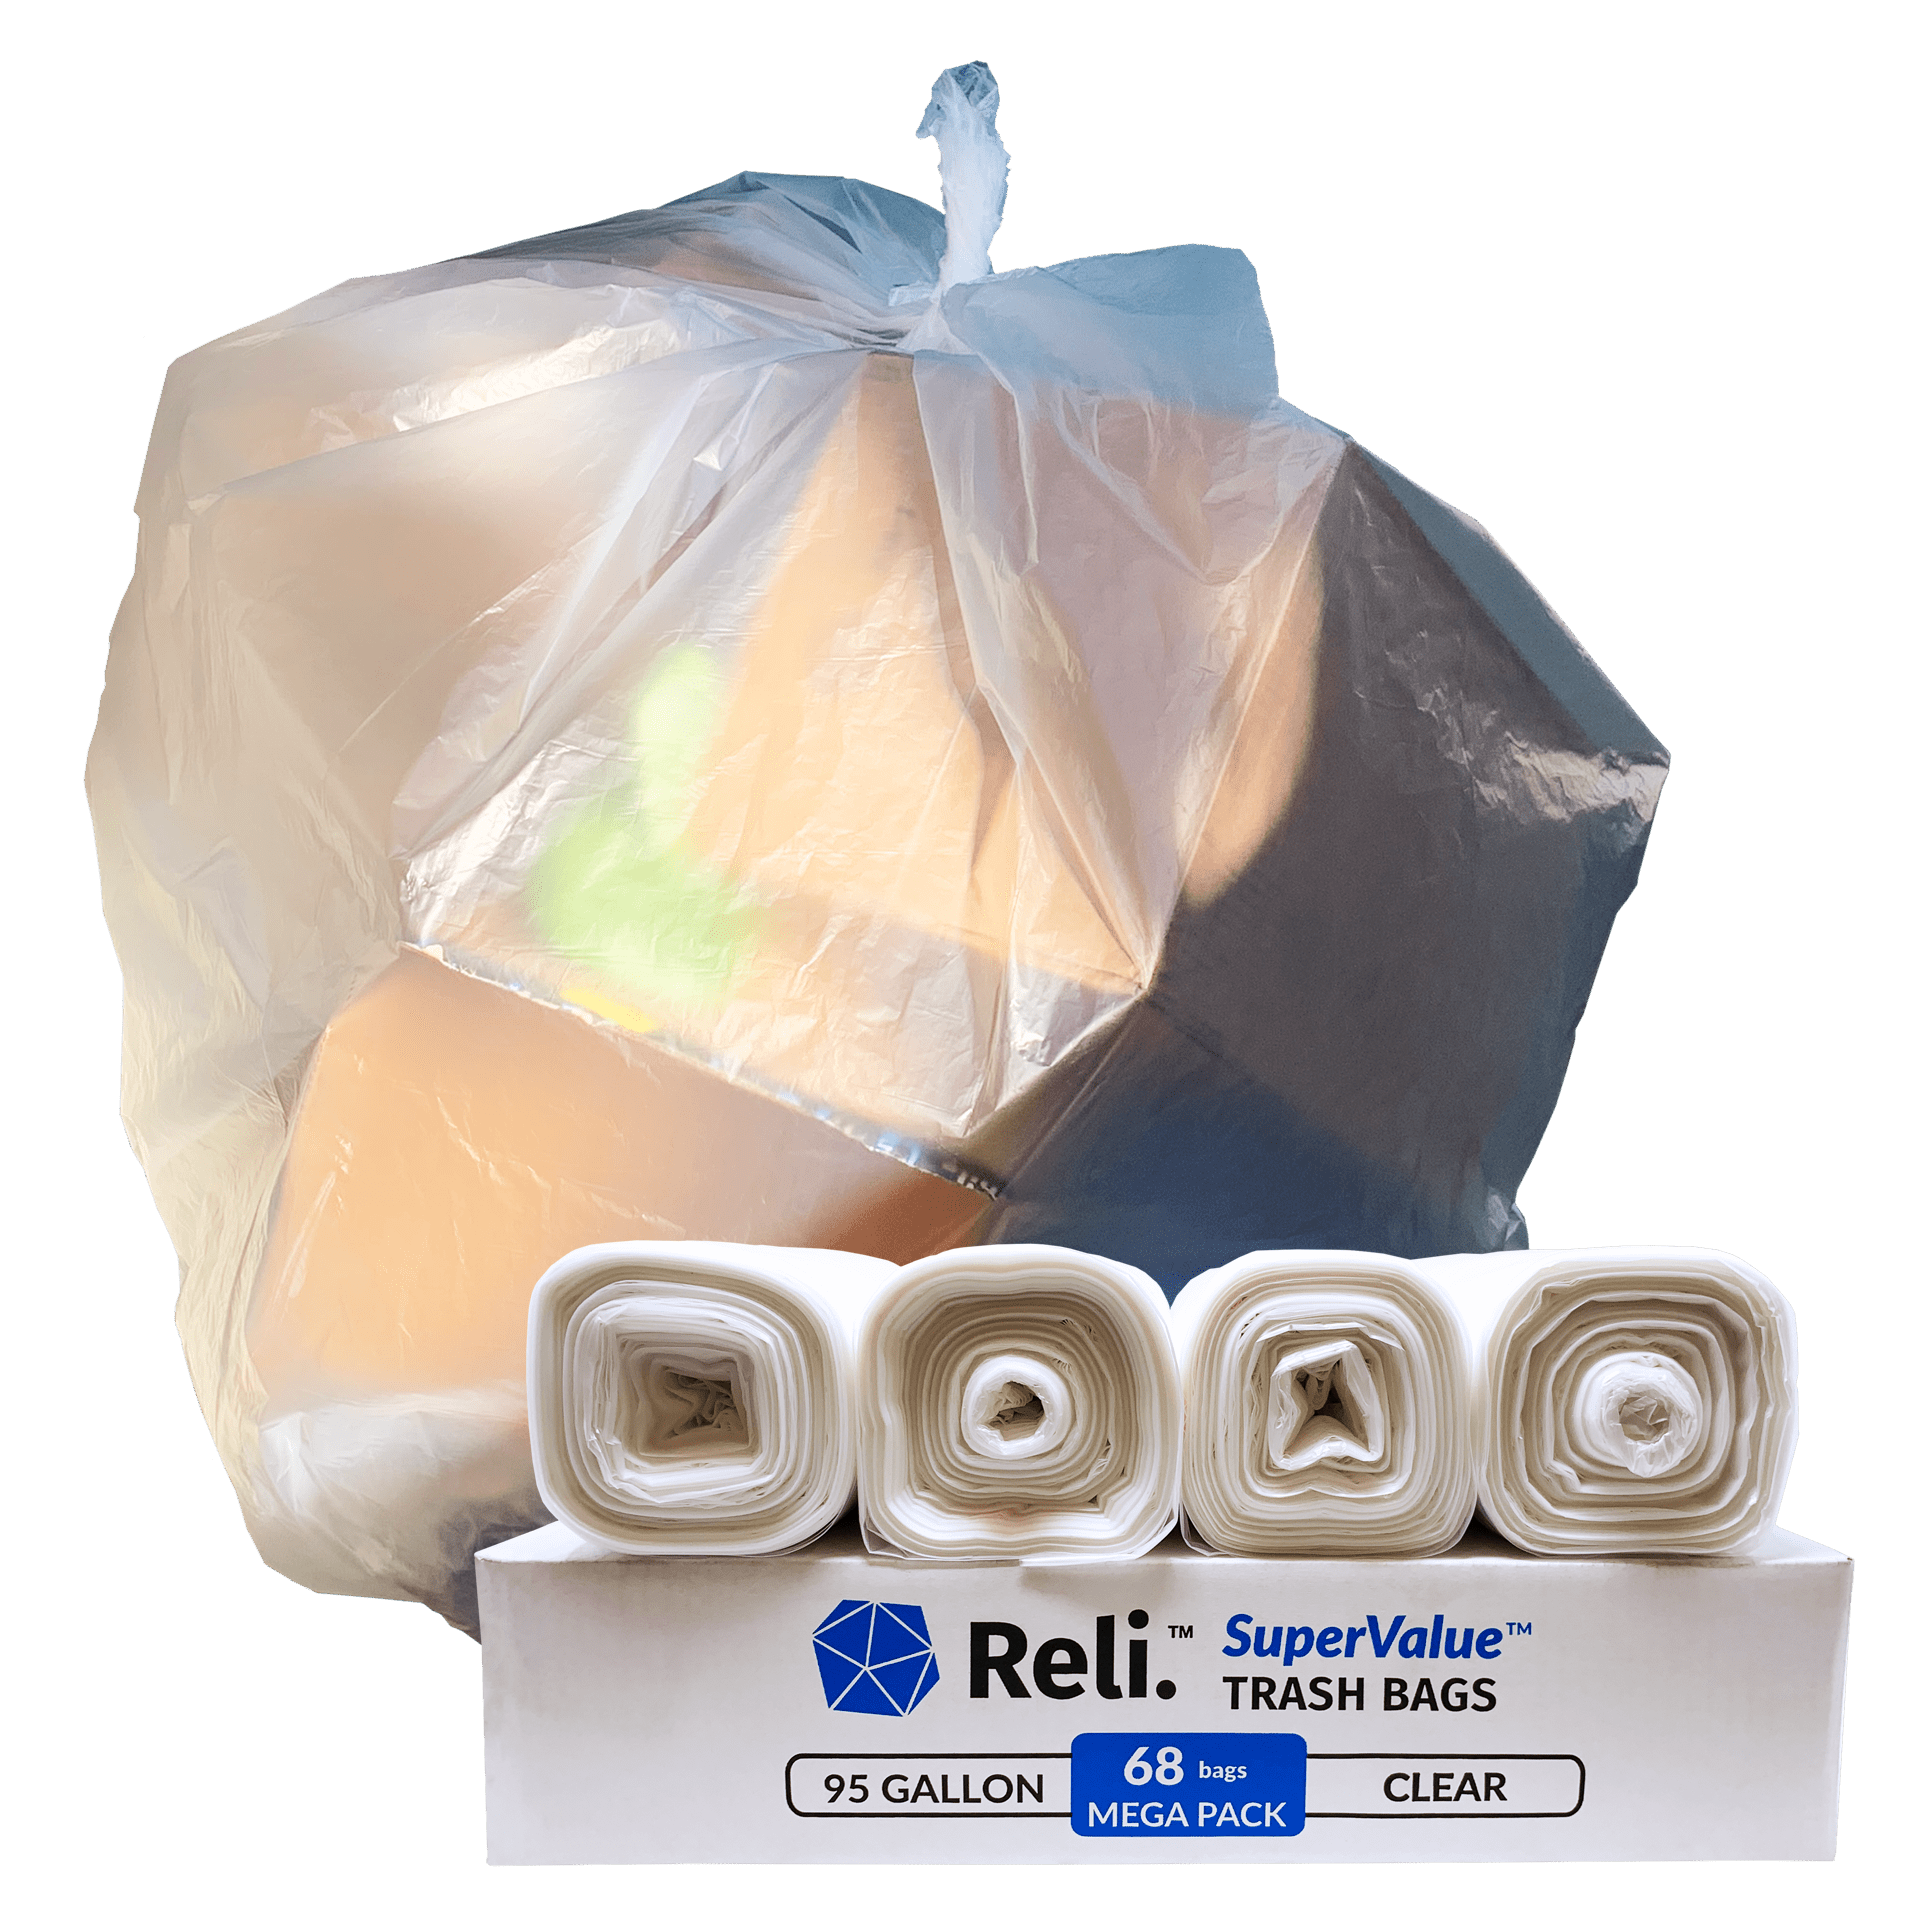 Reli. Supervalue 95 Gallon Trash Bags (68 Count, Bulk) Clear 95 Gallon Garbage Can Liners for Toter, Large Garbage Bags Heavy Duty 95 Gal - 96 Gallon